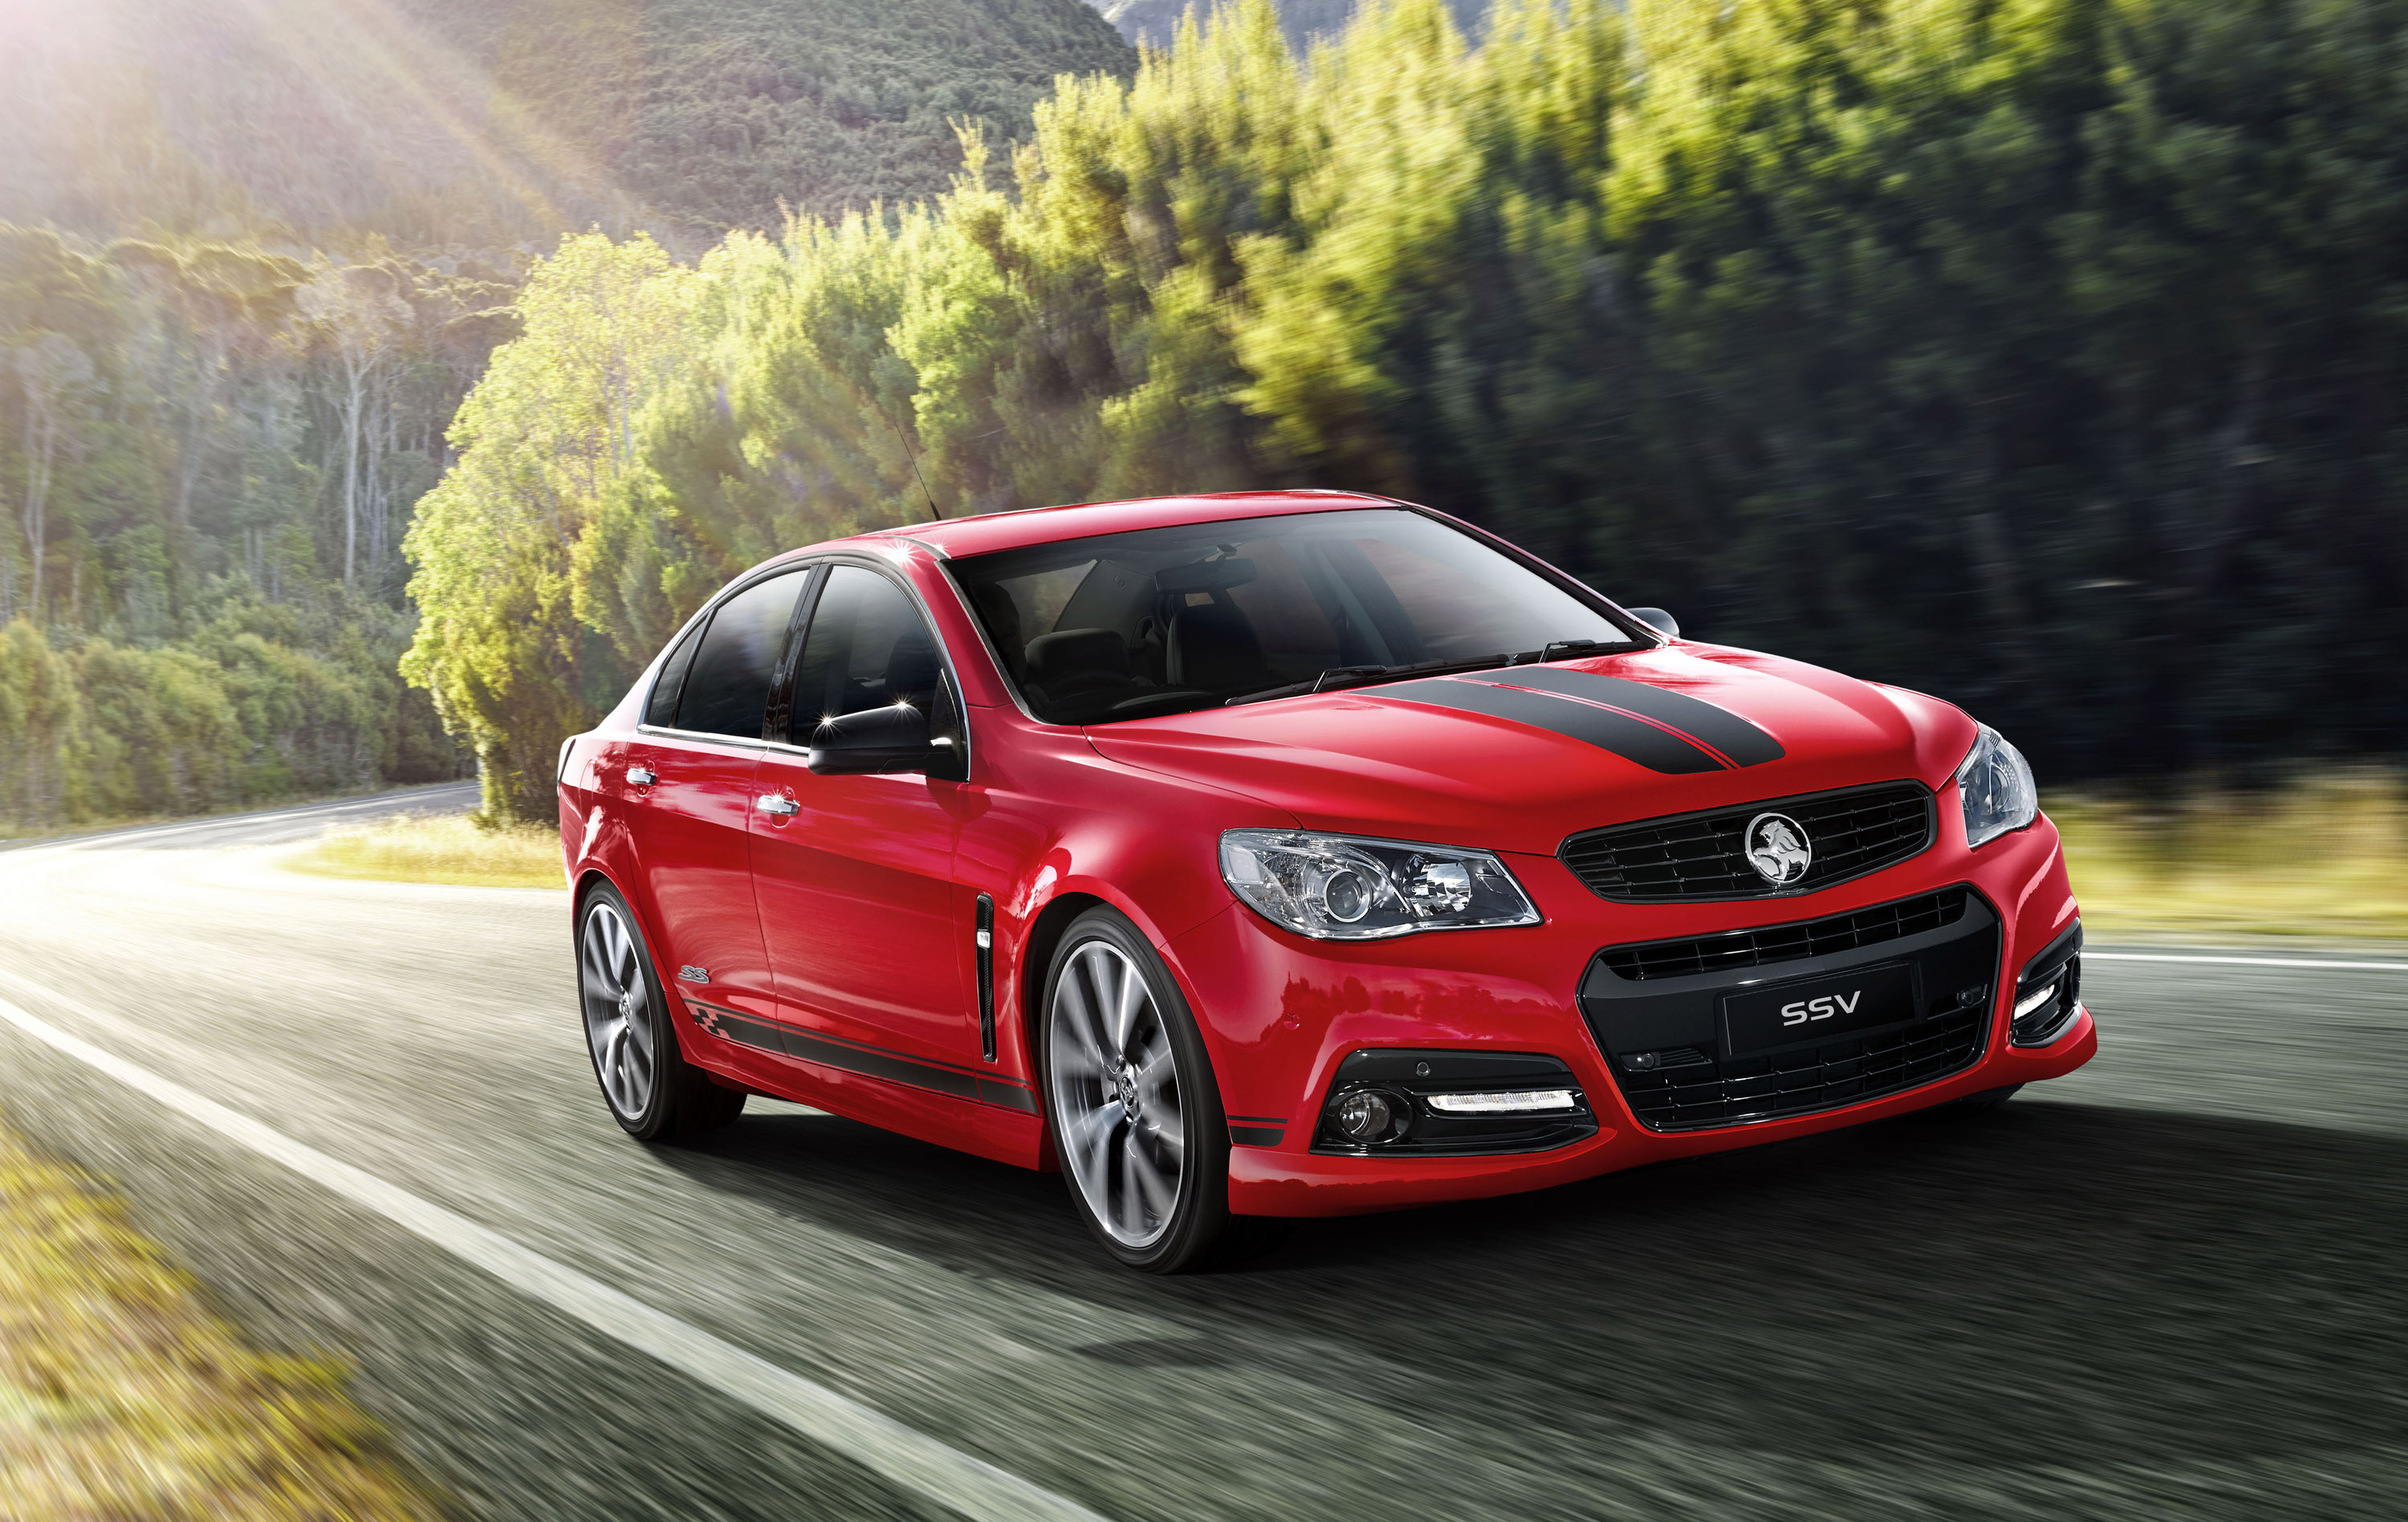 Holden VF Commodore Styling Accessories